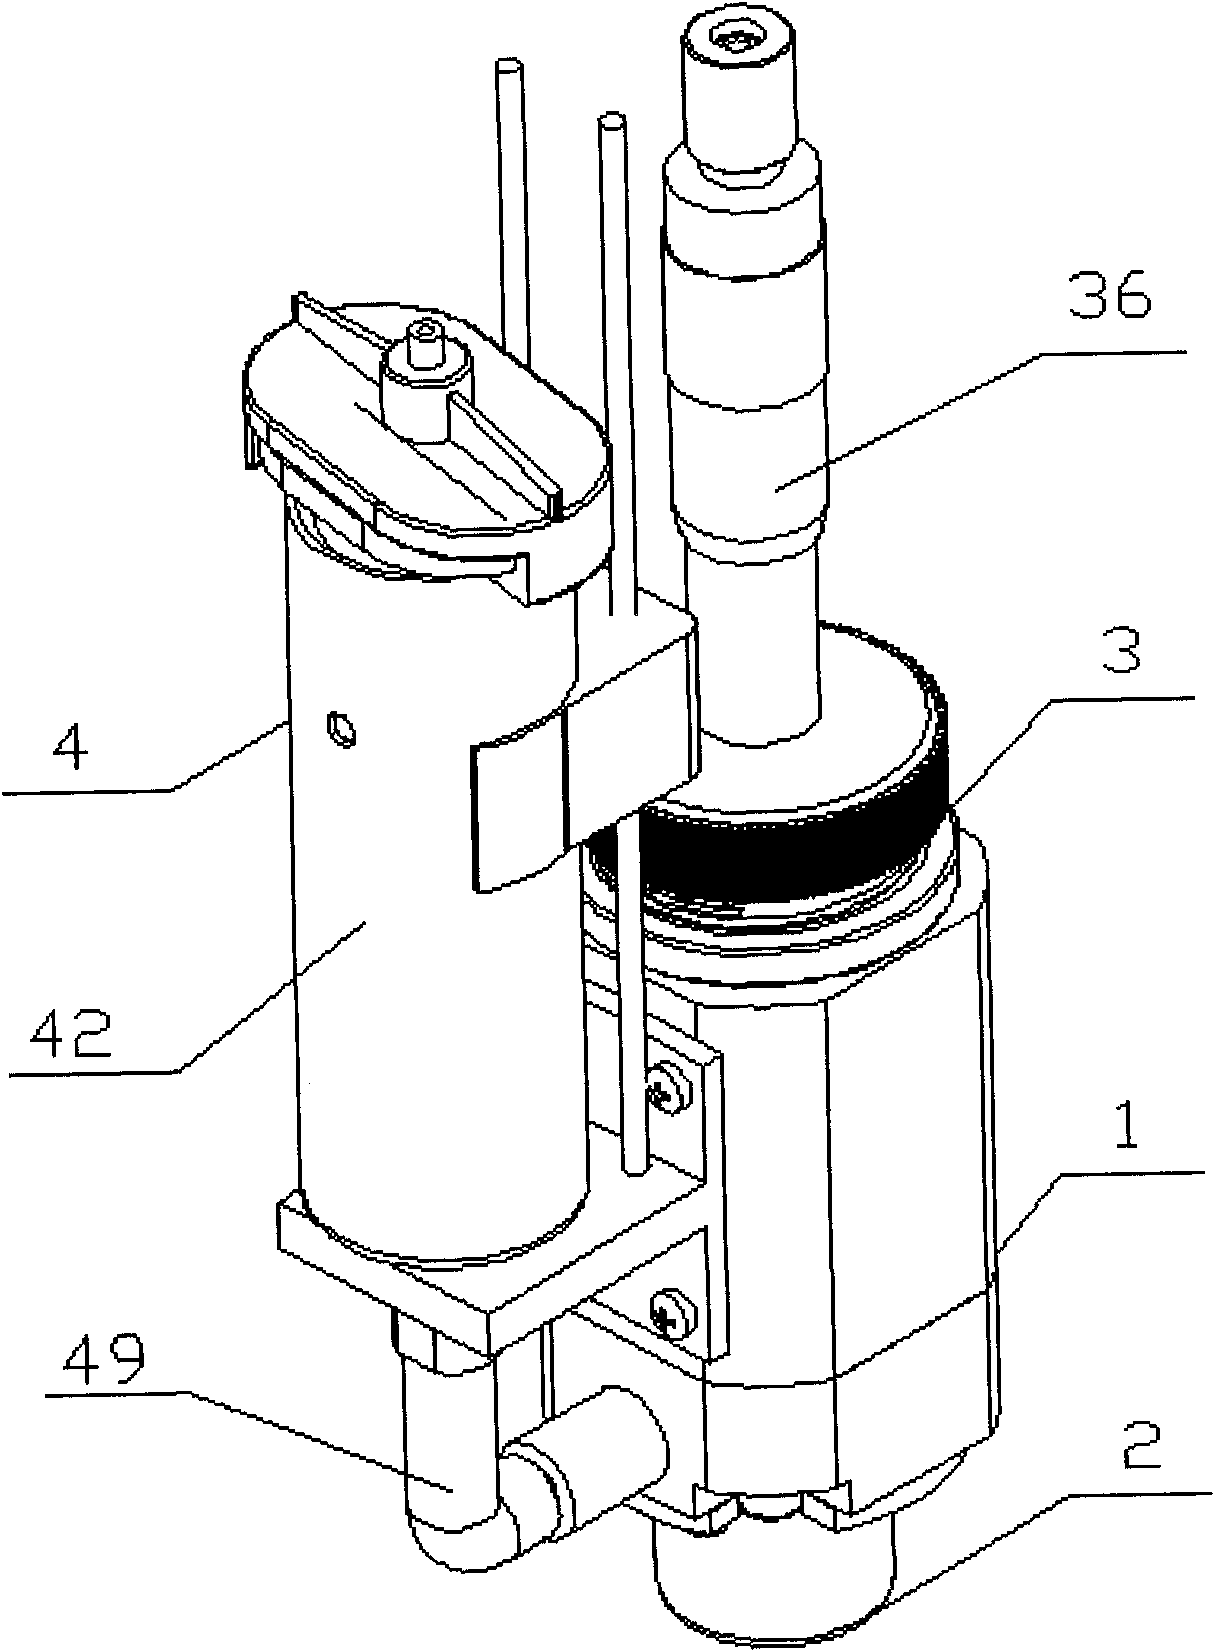 Ejecting adhesive dispenser based on dual-function cylinder